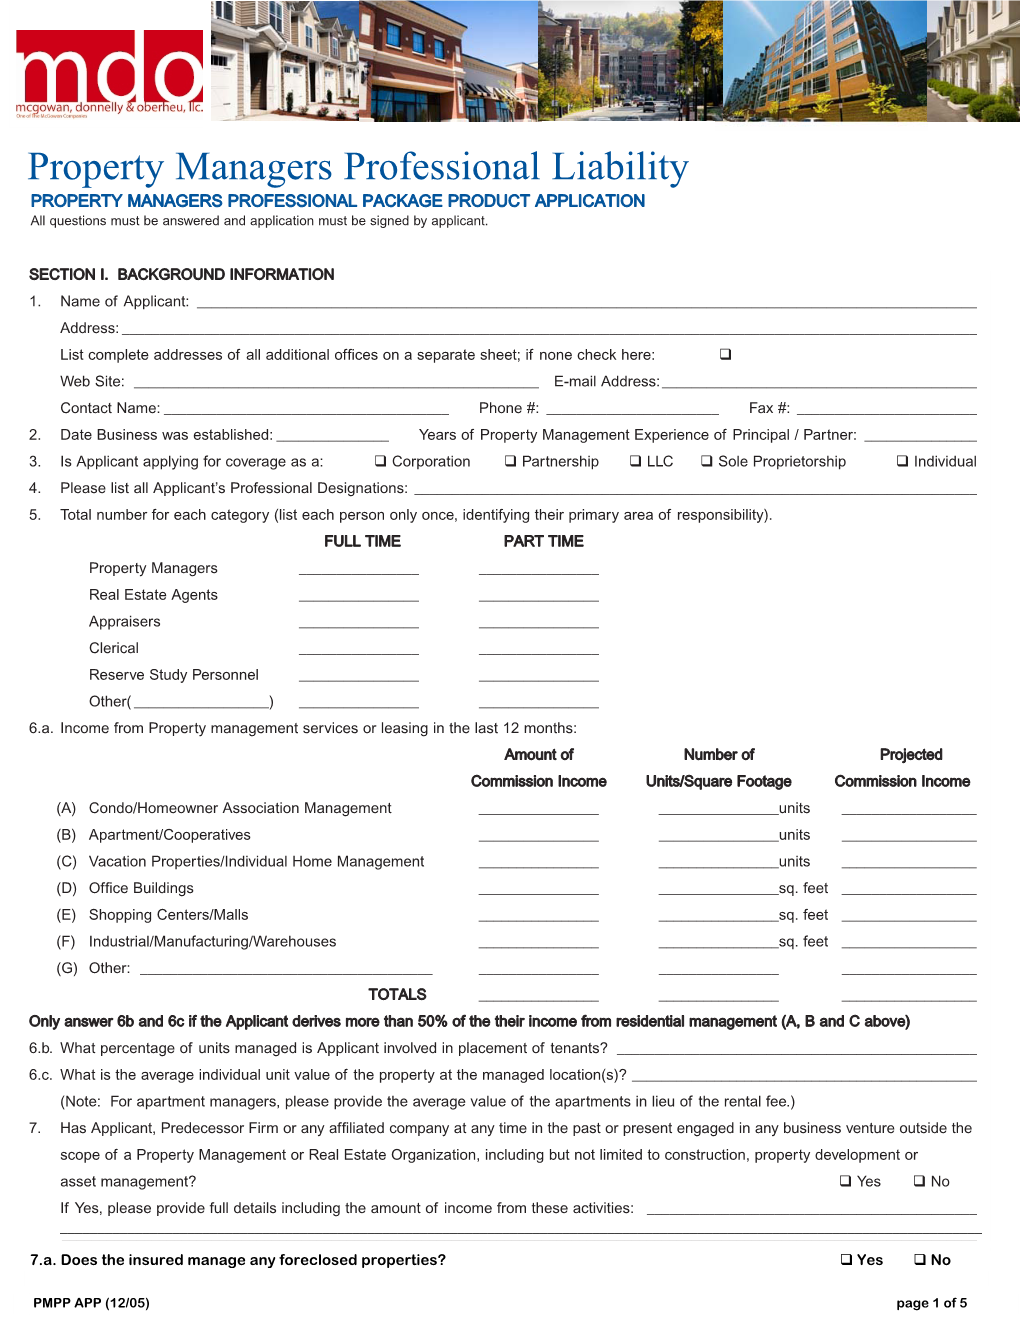 Property Managers Professional Liability